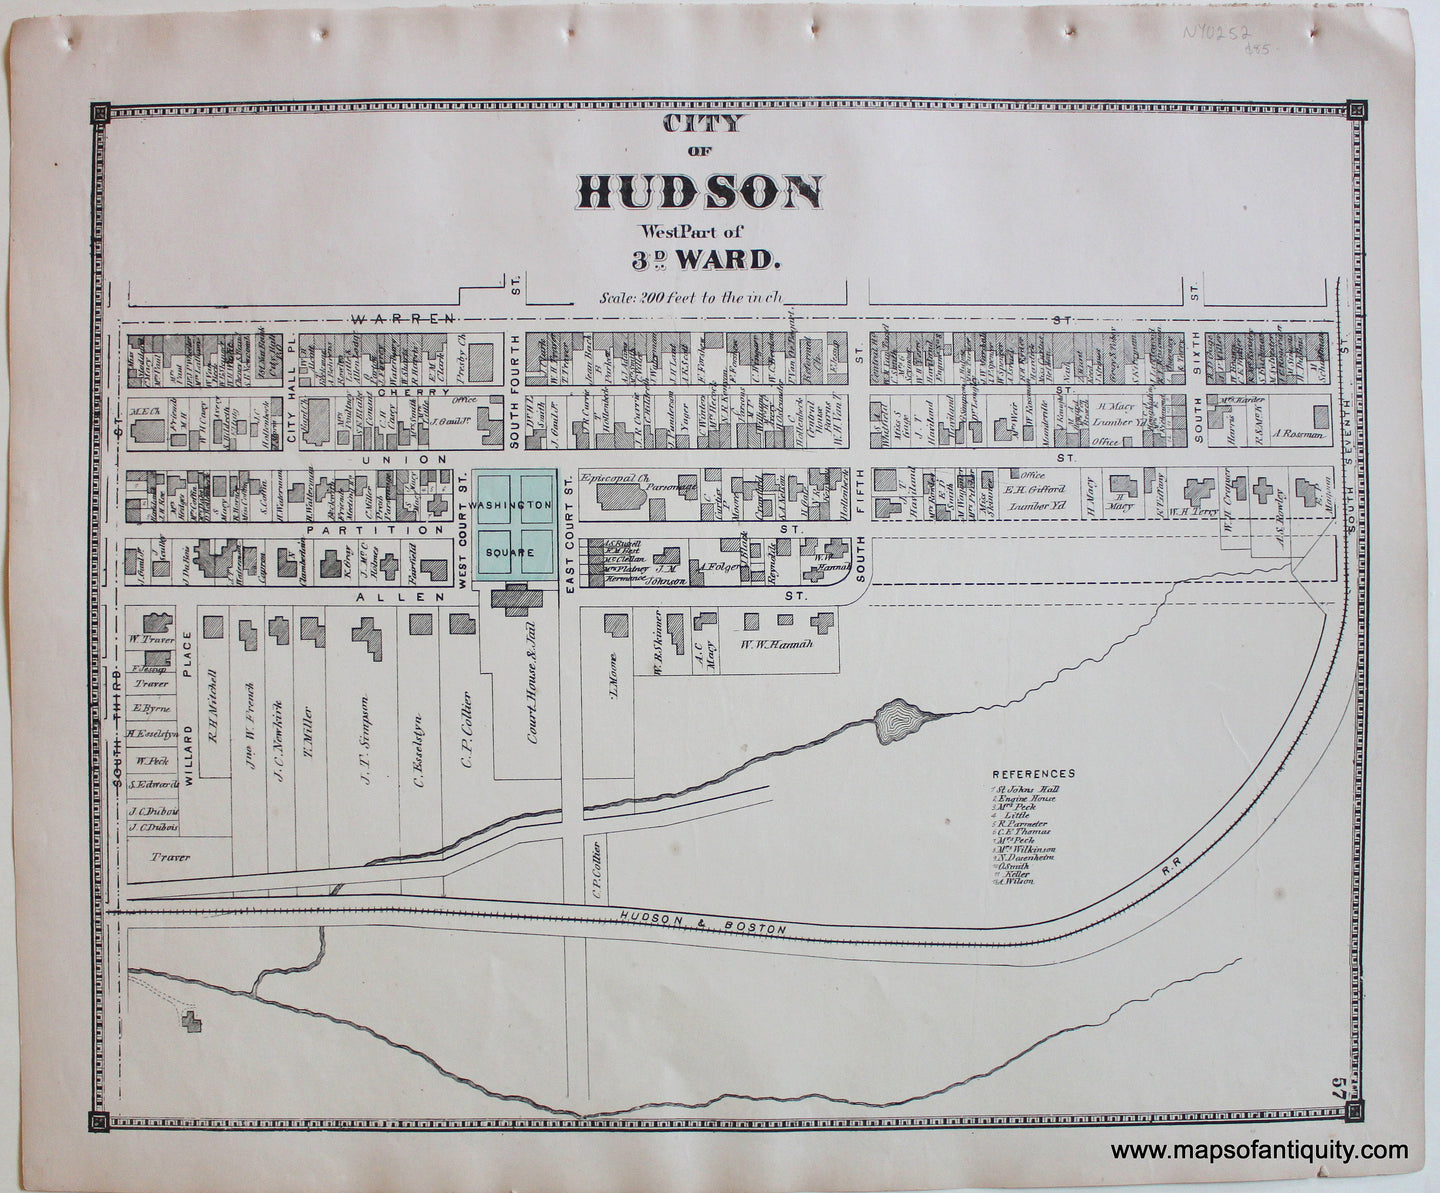 Antique-Map-City-of-Hudson-West-Part-of-3rd-Ward-Columbia-County-Atlas-New-York-State-Beers-1873-Maps-of-Antiquity